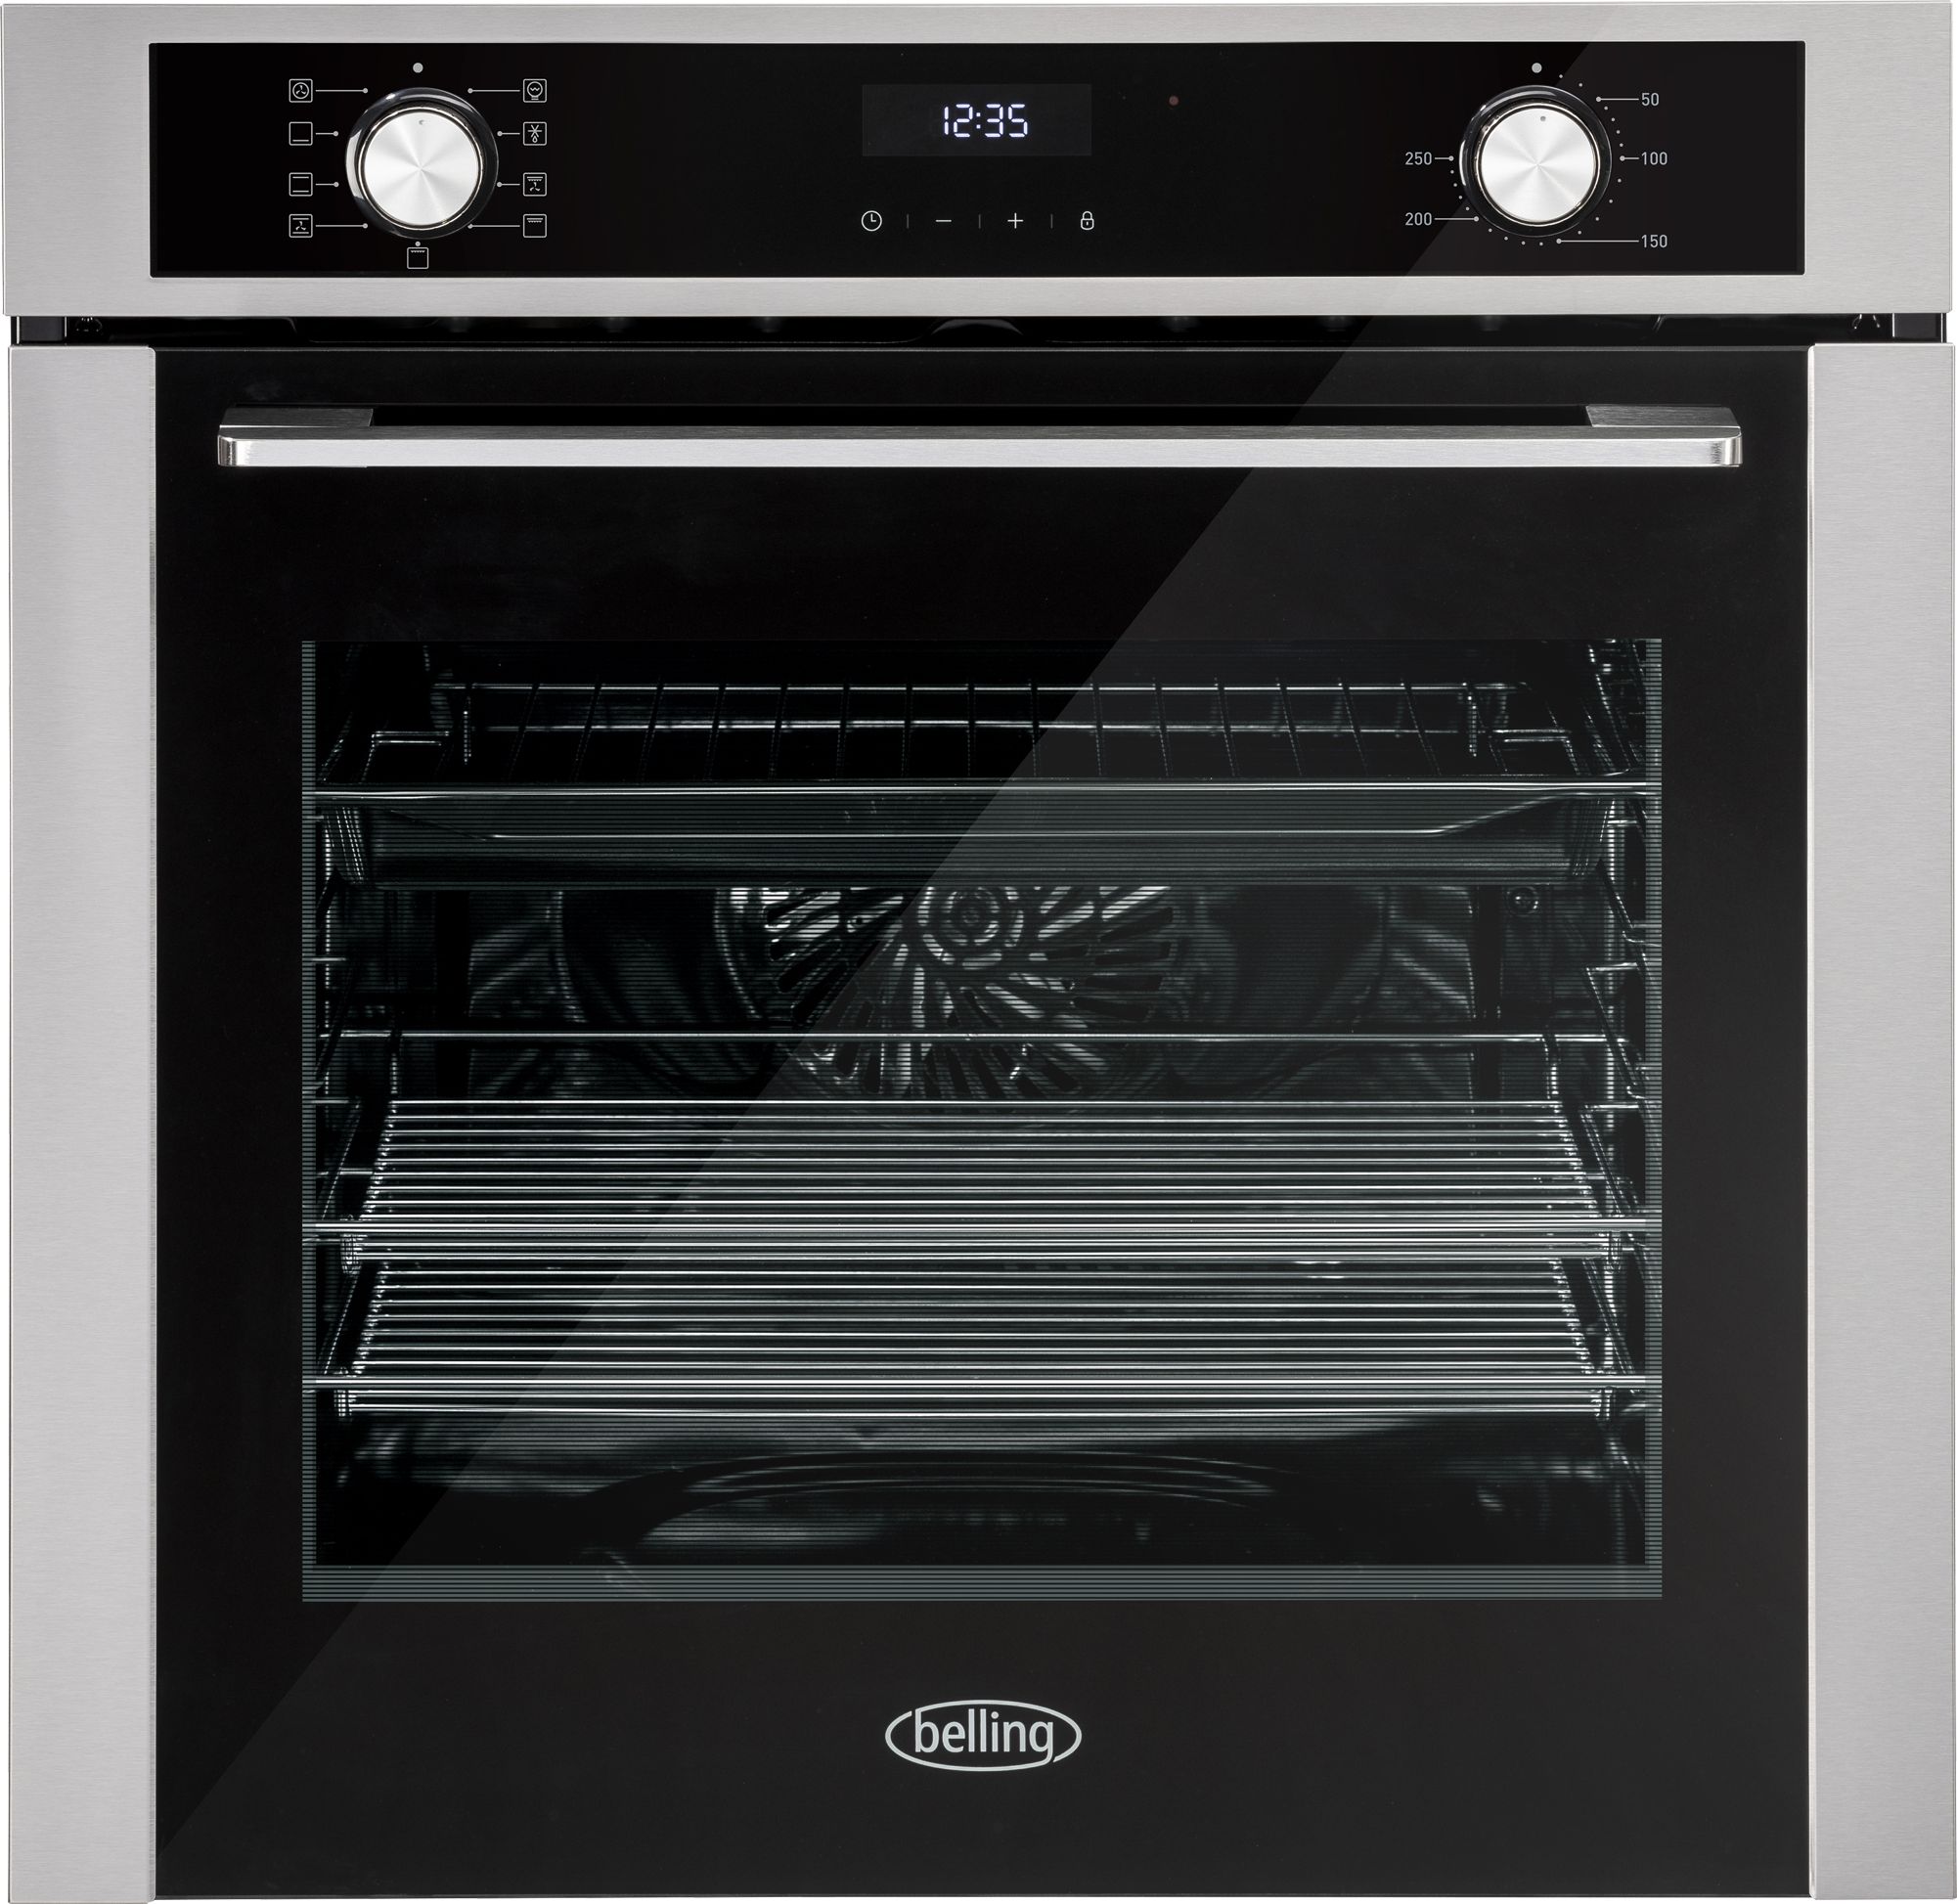 Belling ComfortCook BEL BI603MF Built In Electric Single Oven - Stainless Steel - A Rated, Stainless Steel